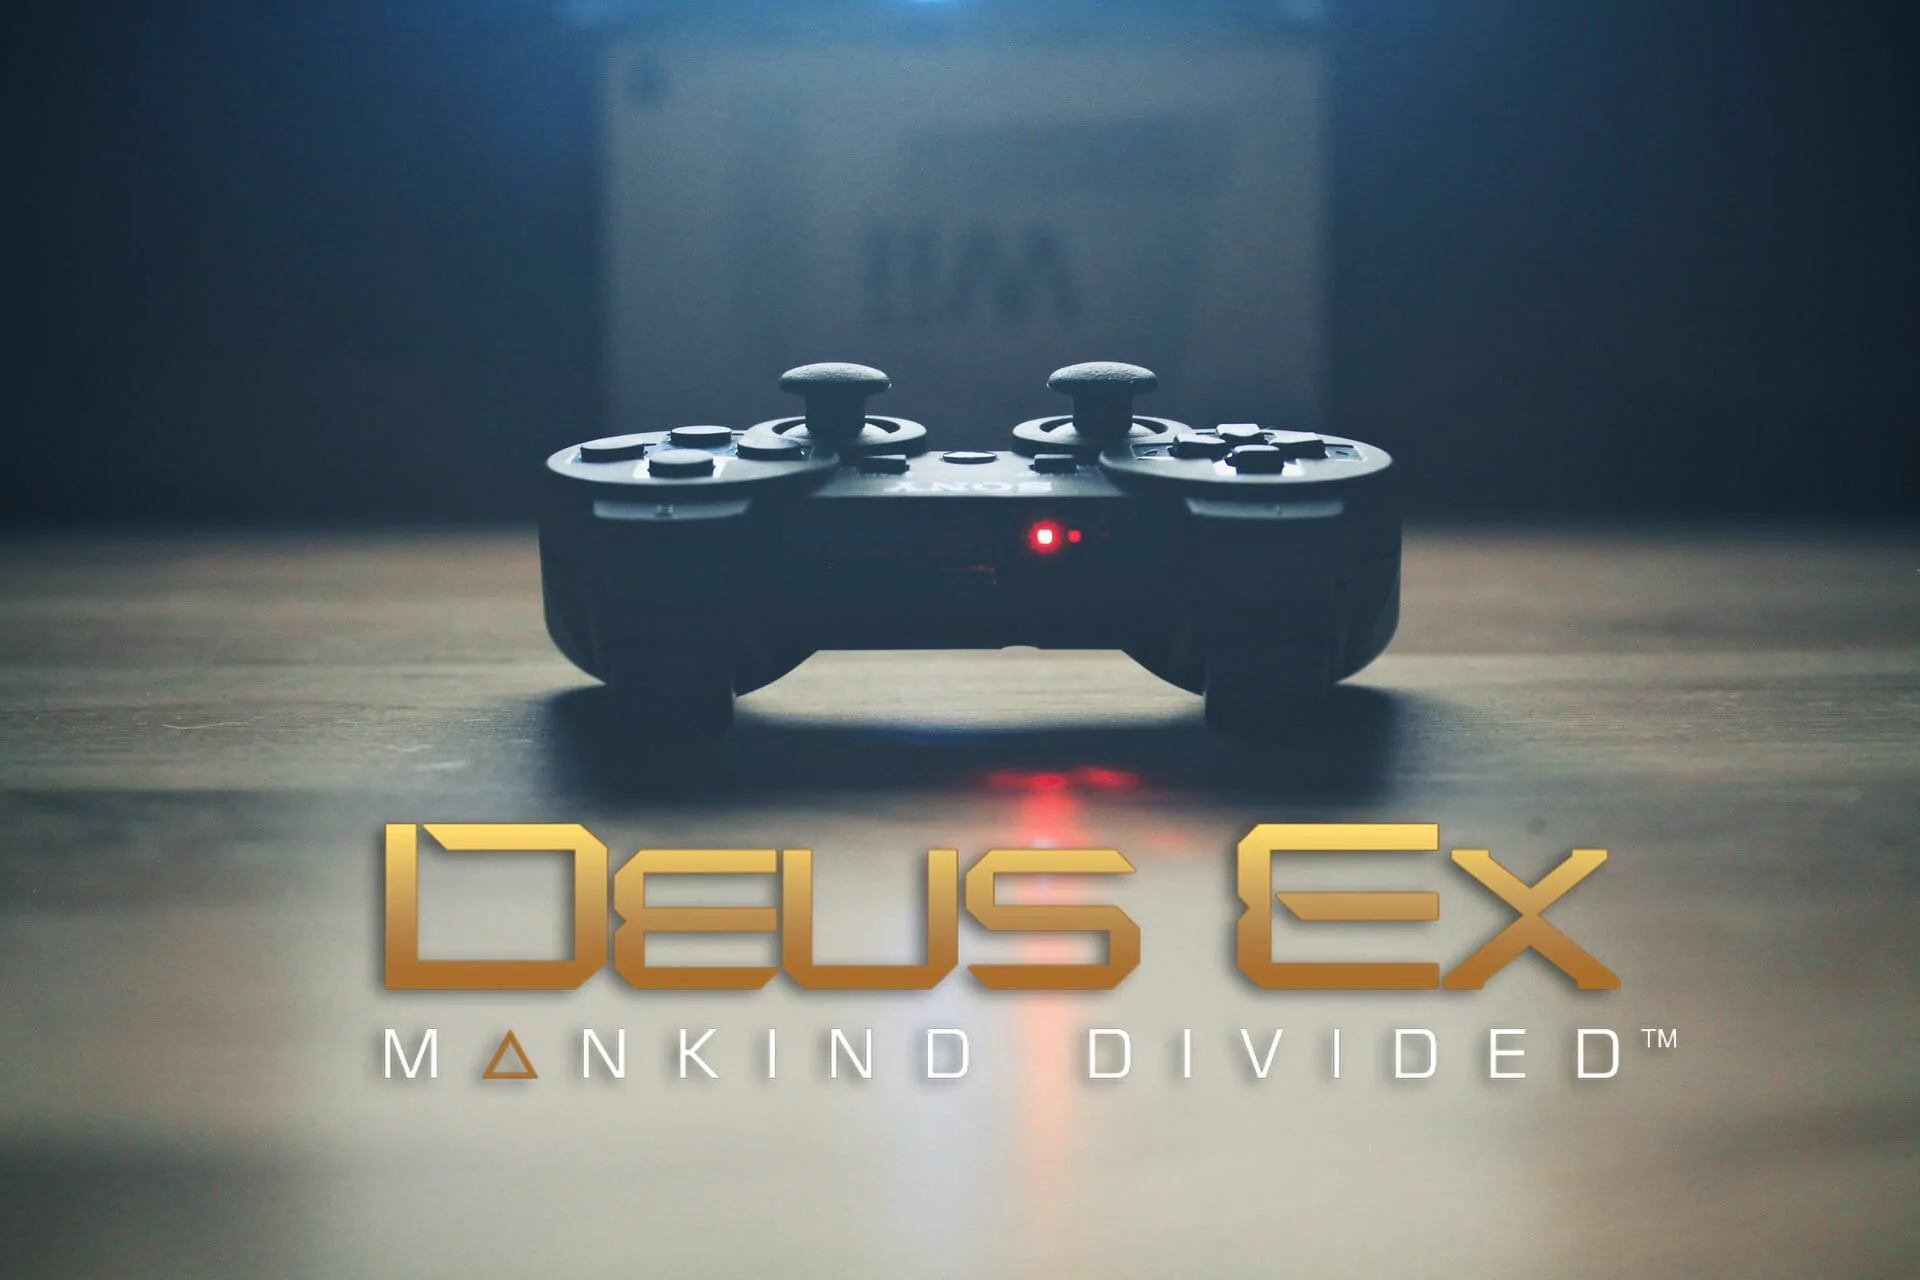 Deus Ex Mankind Divided a problem has occurred with your display driver